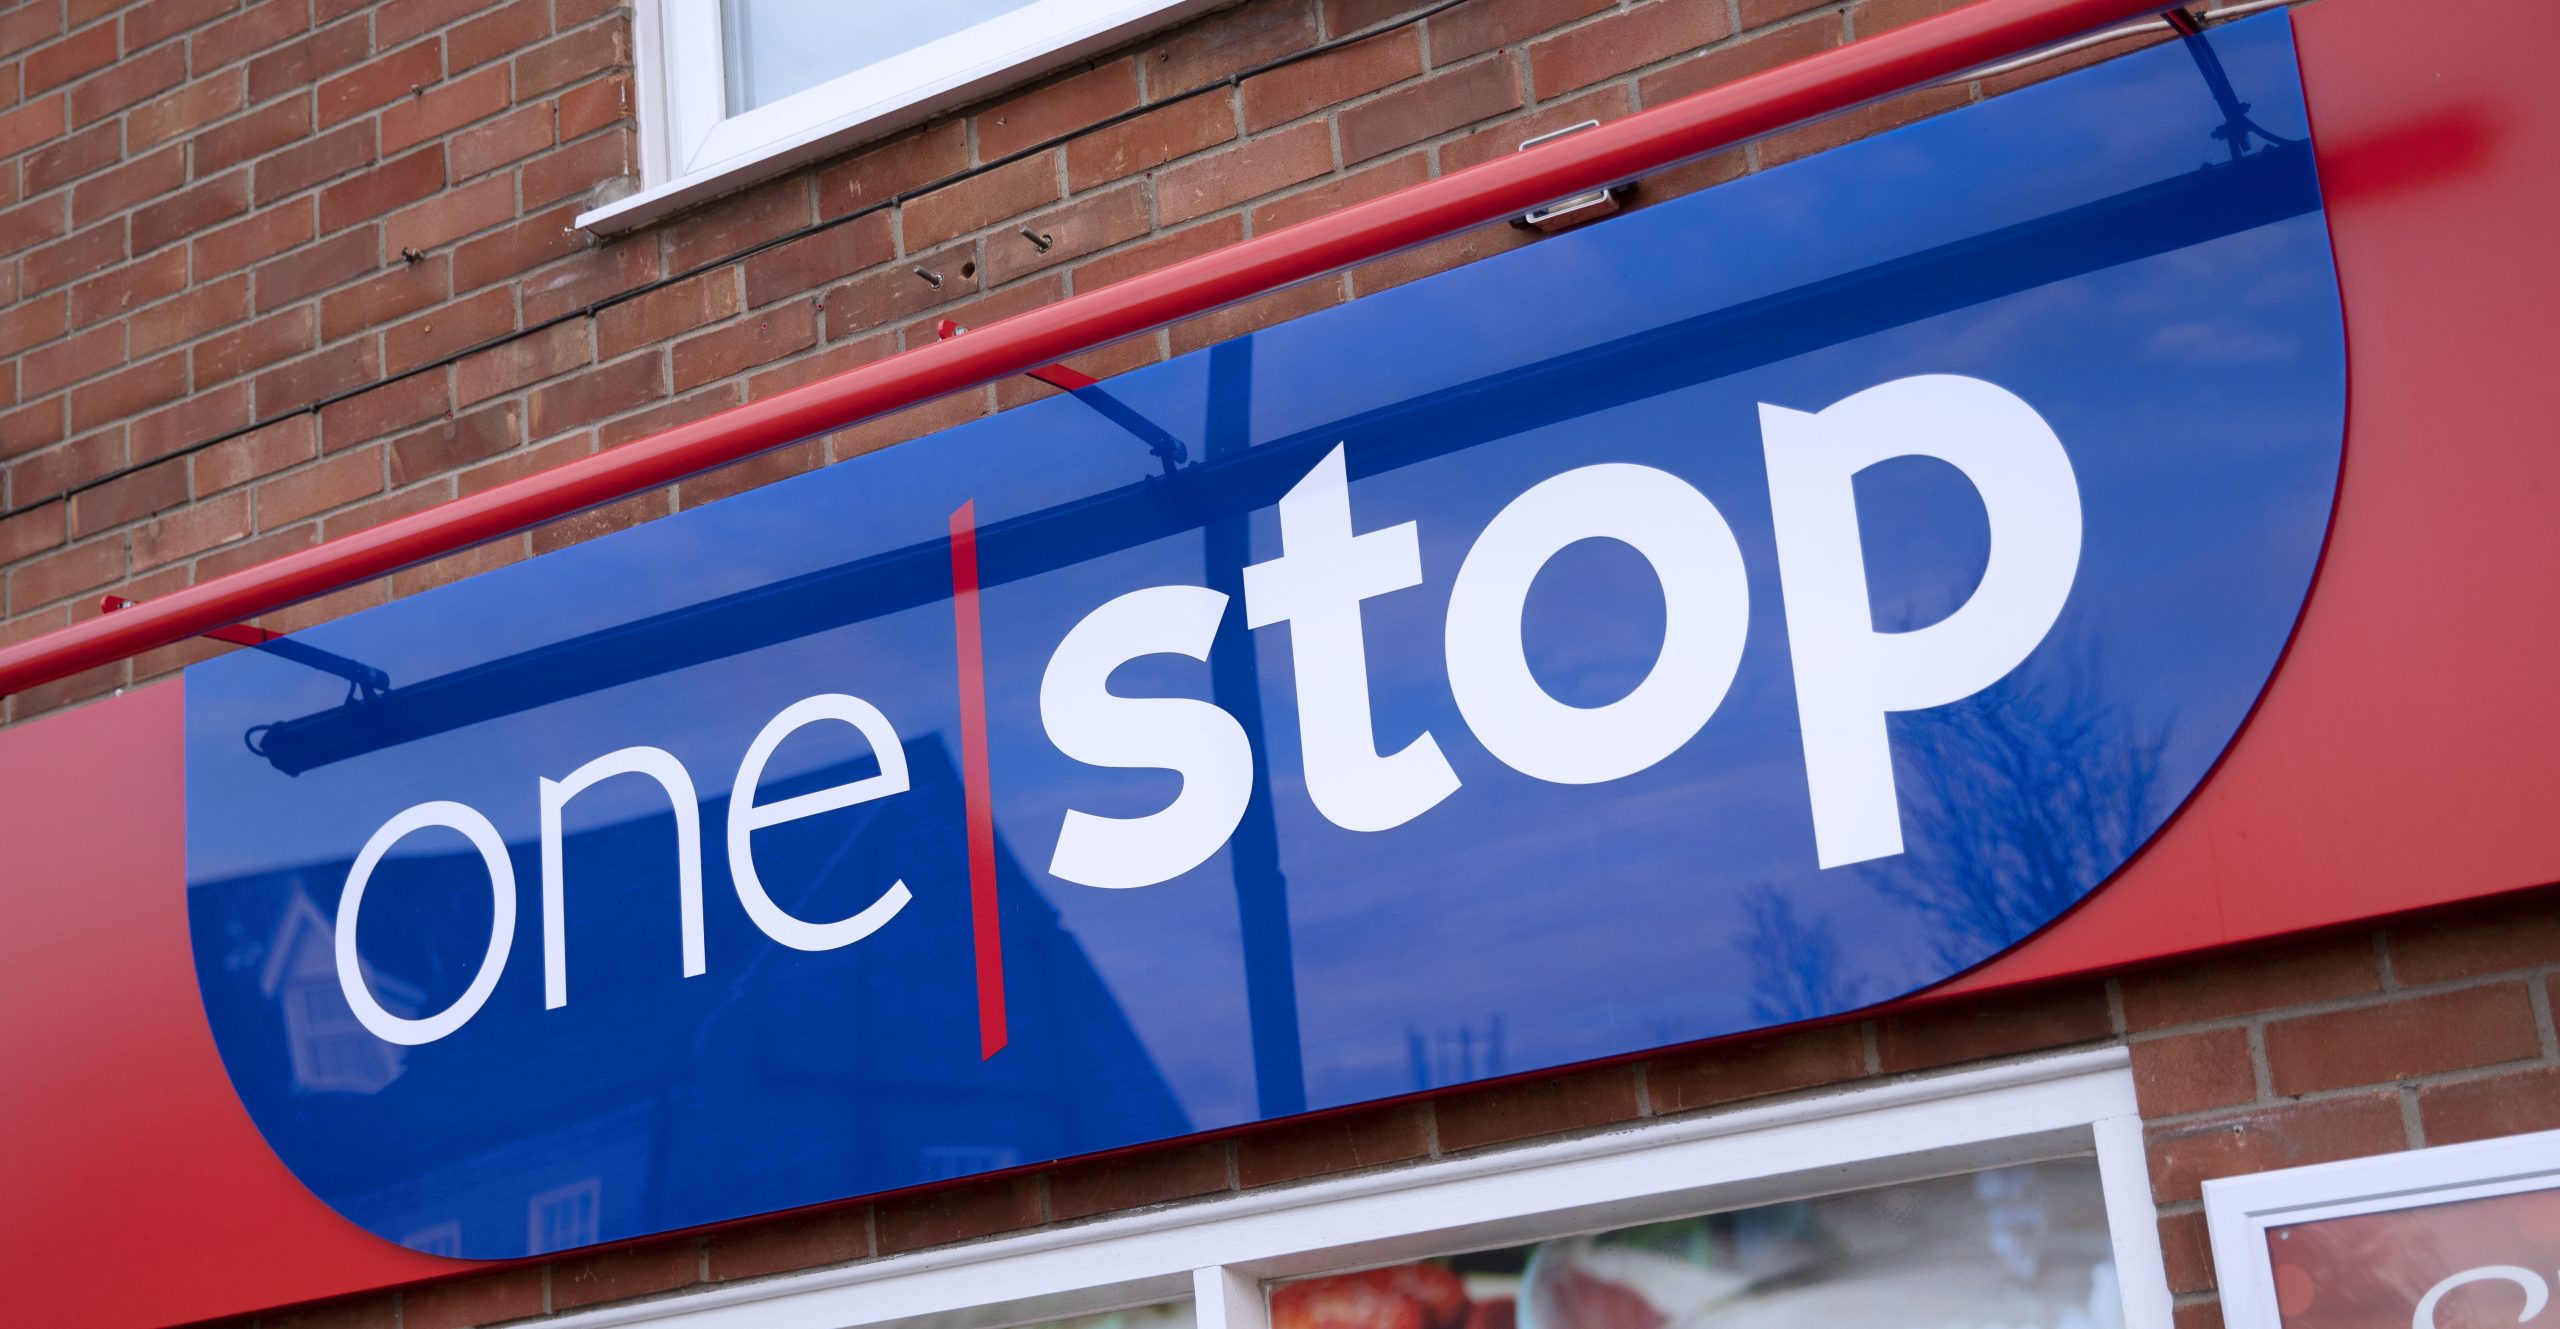 One Stop raises £10 million over 10 years for charity